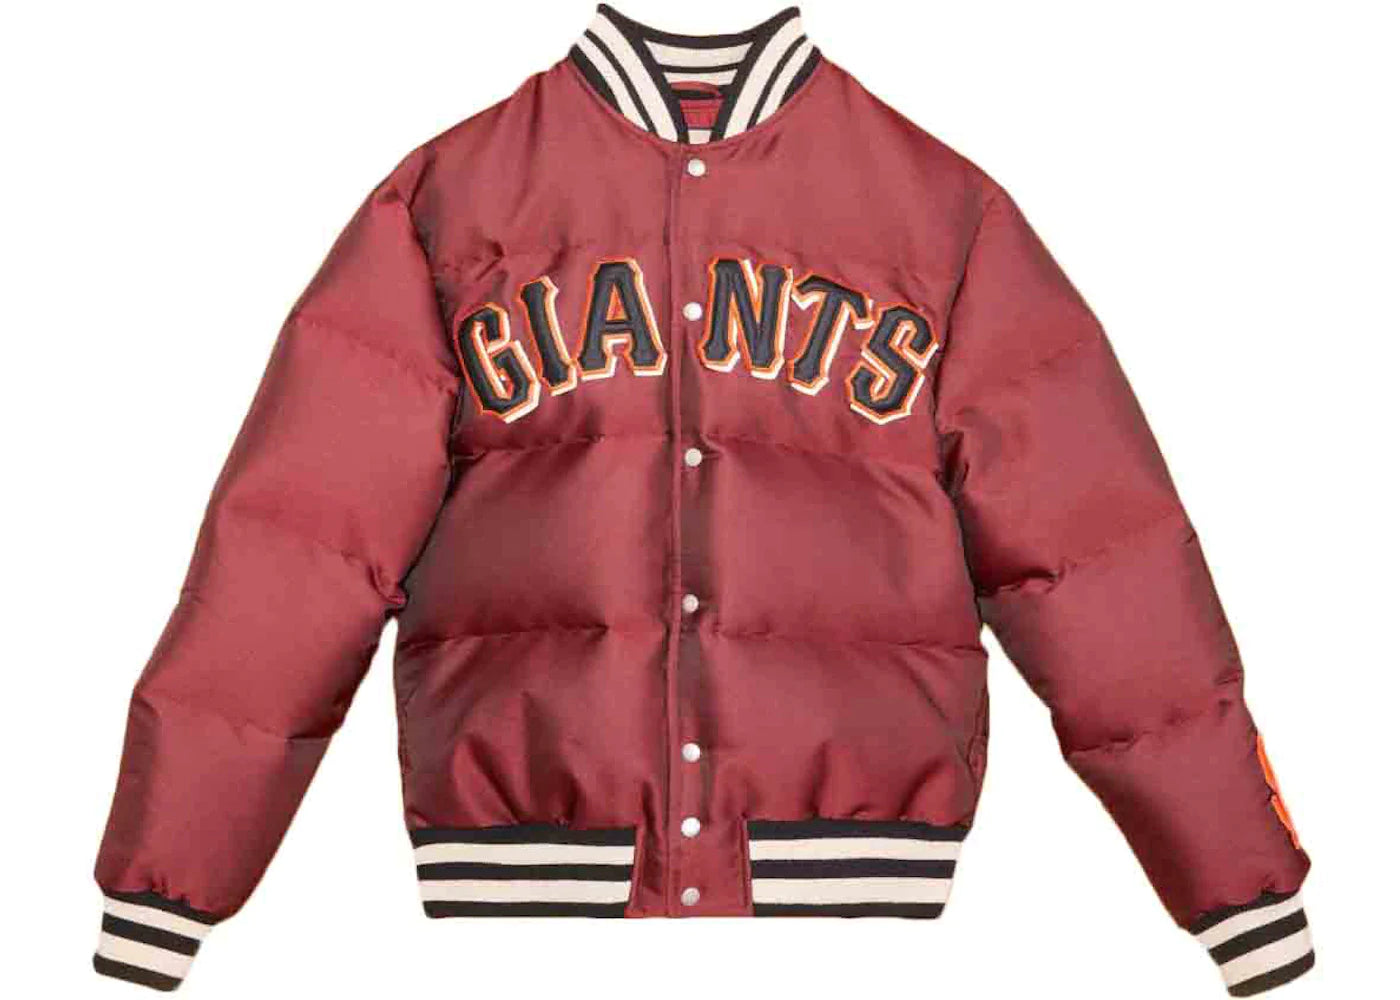 Gucci x MLB 2022 Padded Satin Jacket with Giants Patch Bordeaux